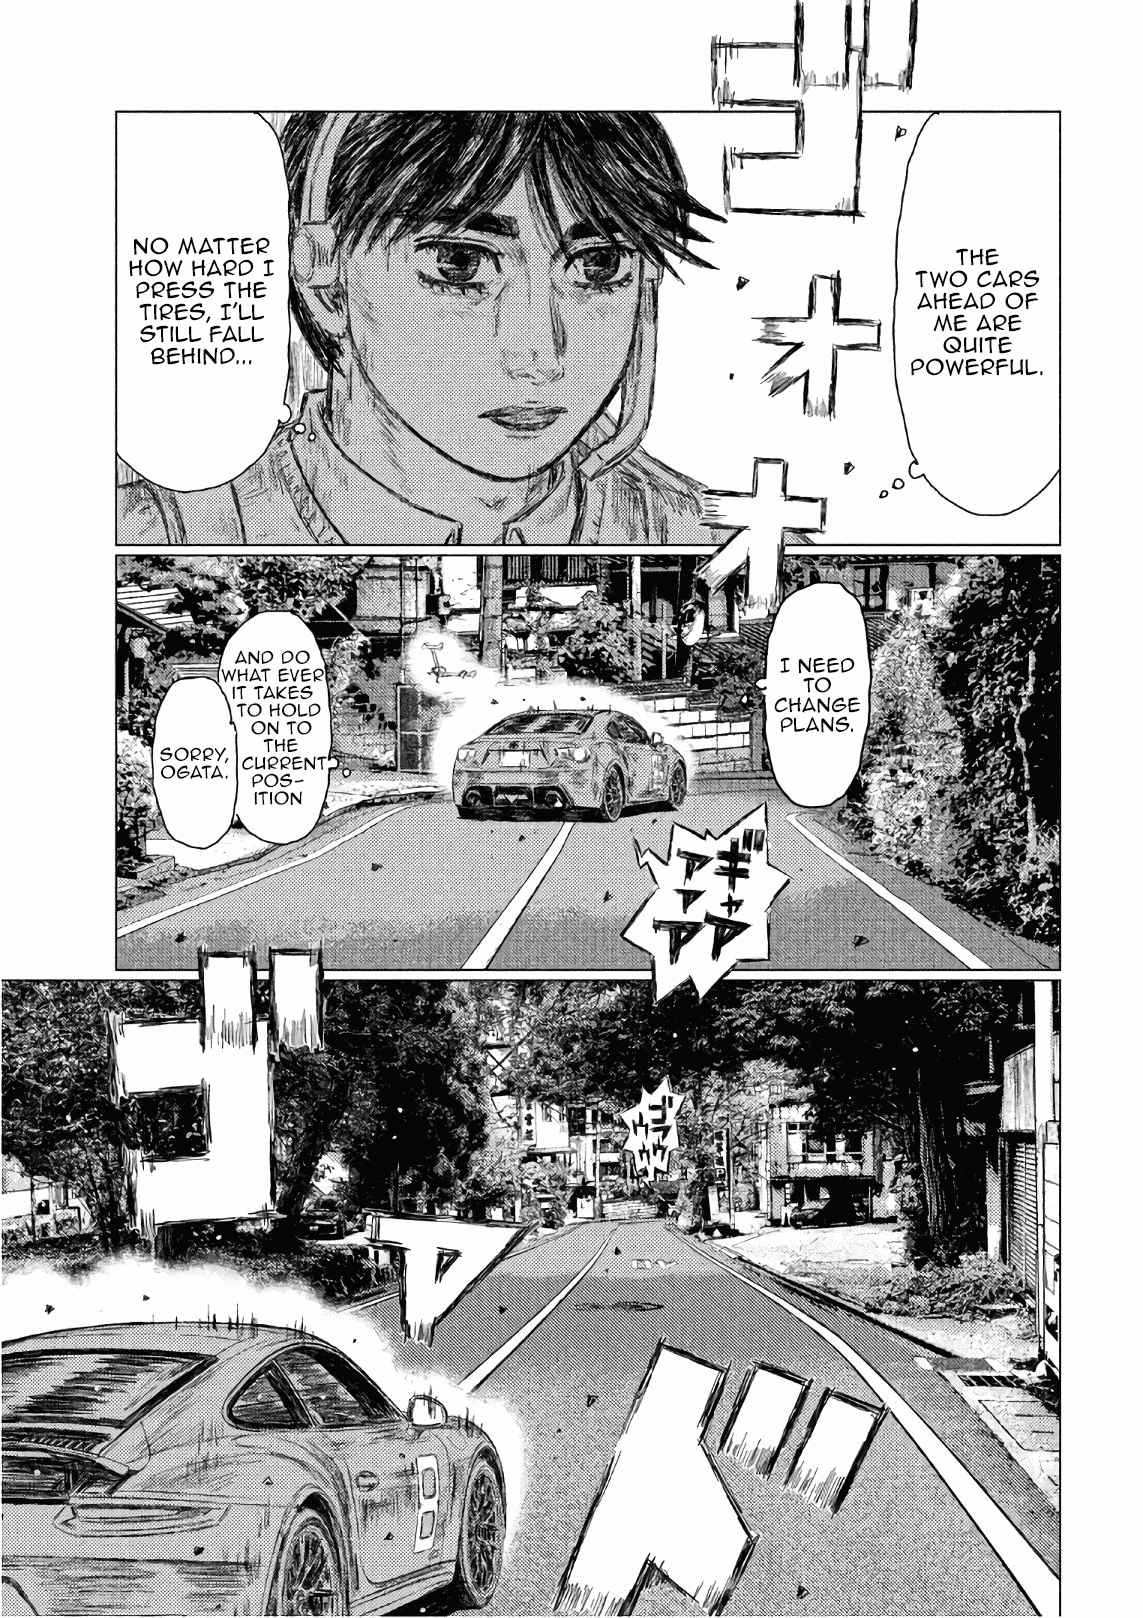 MF Ghost Vol. 4 Ch. 41 Two Routes